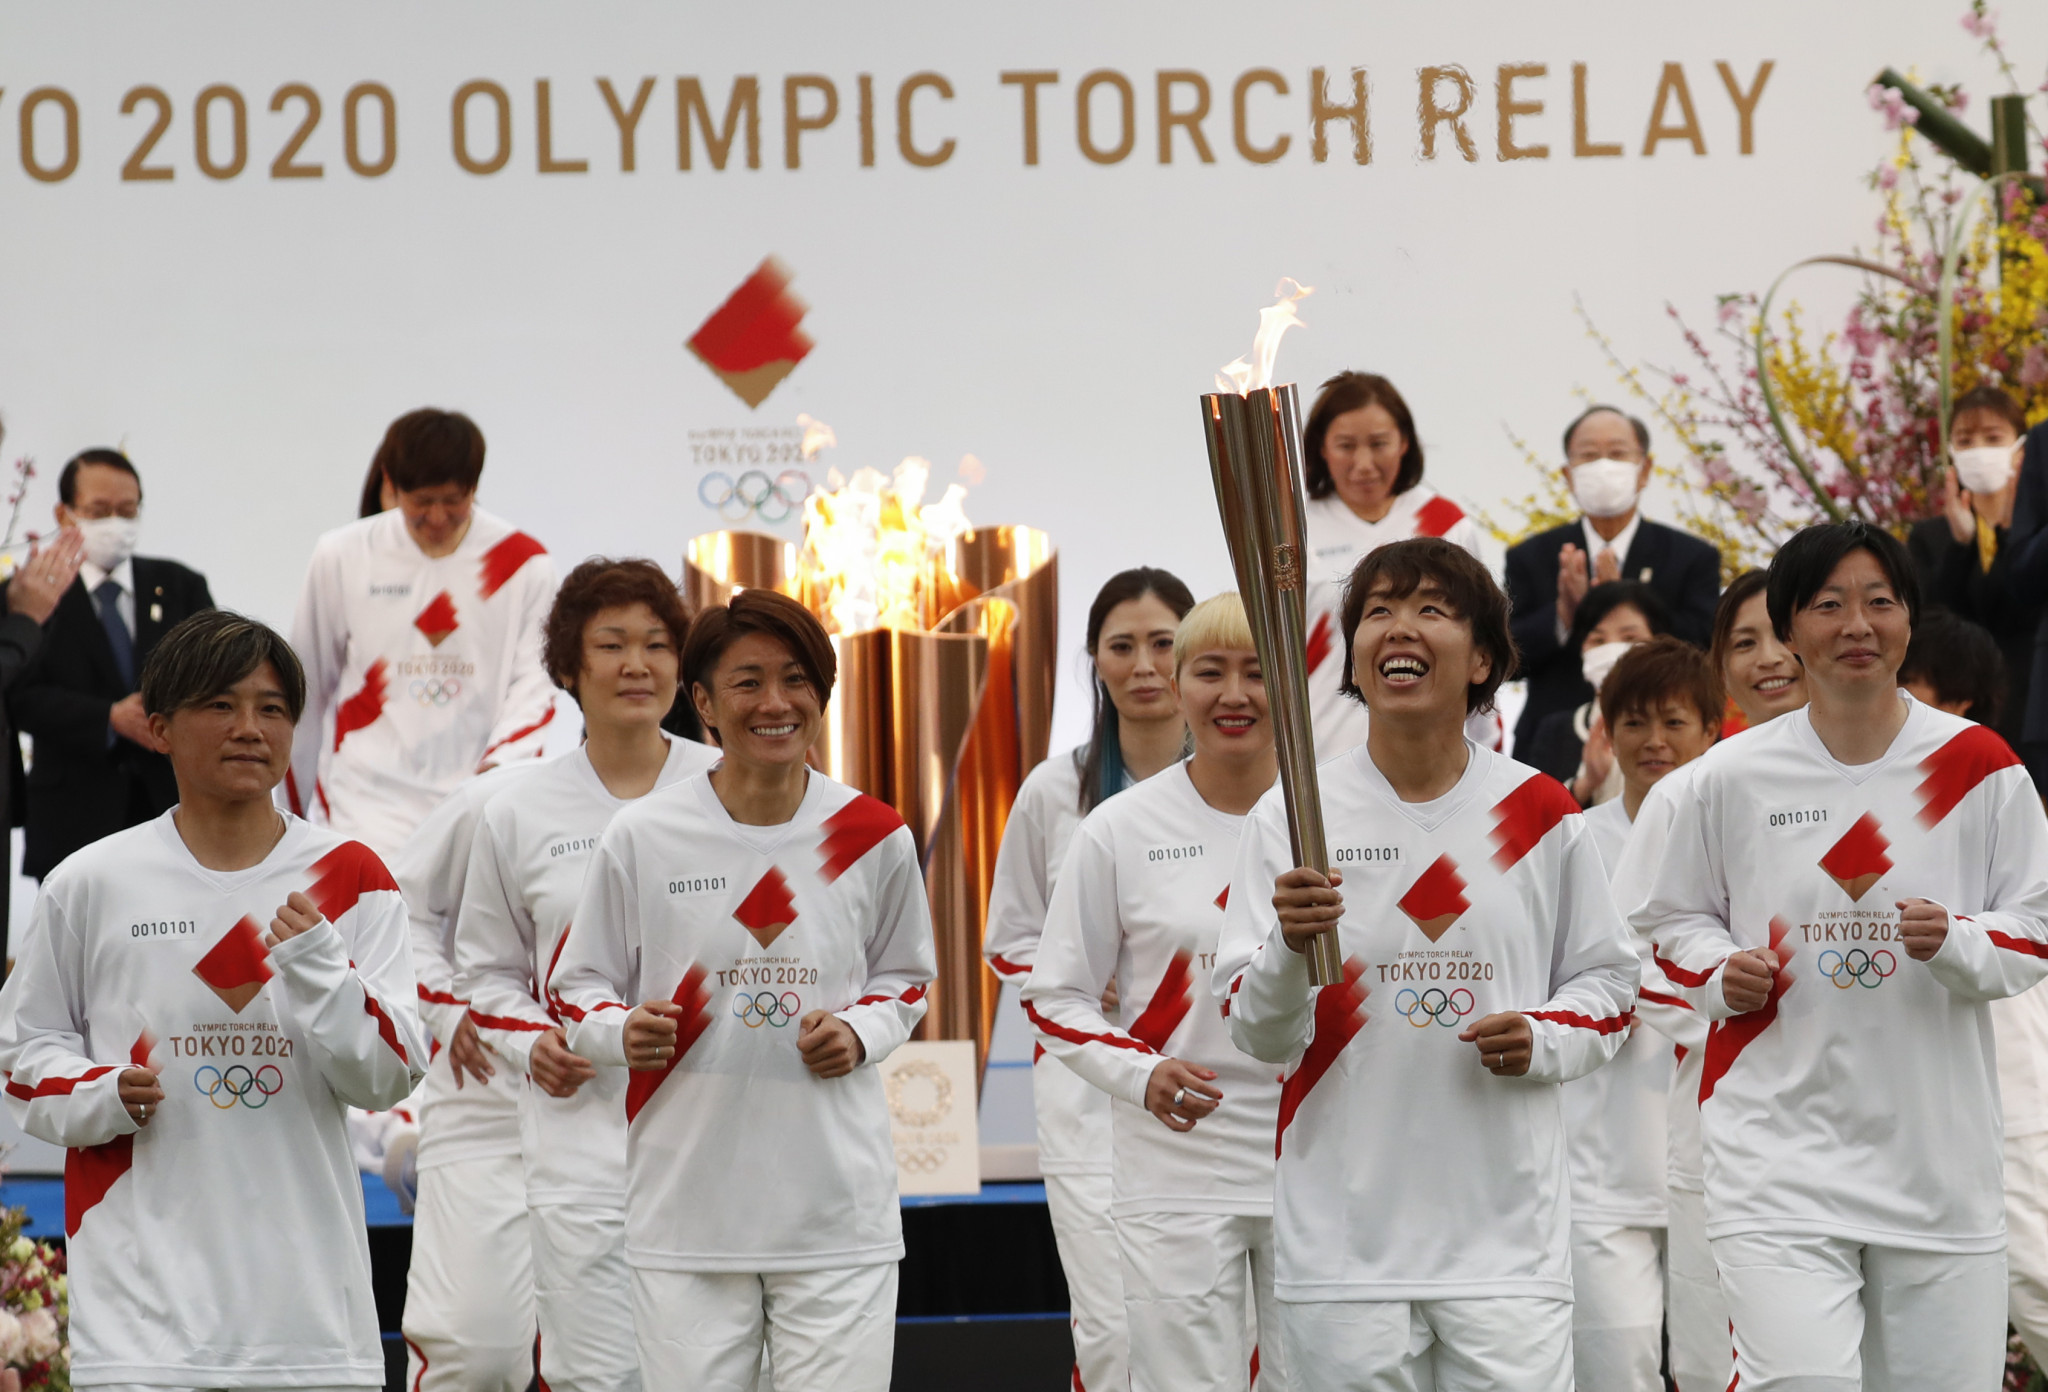 Olympic Torch Relay begins in Fukushima, billed as "bright light for hope"